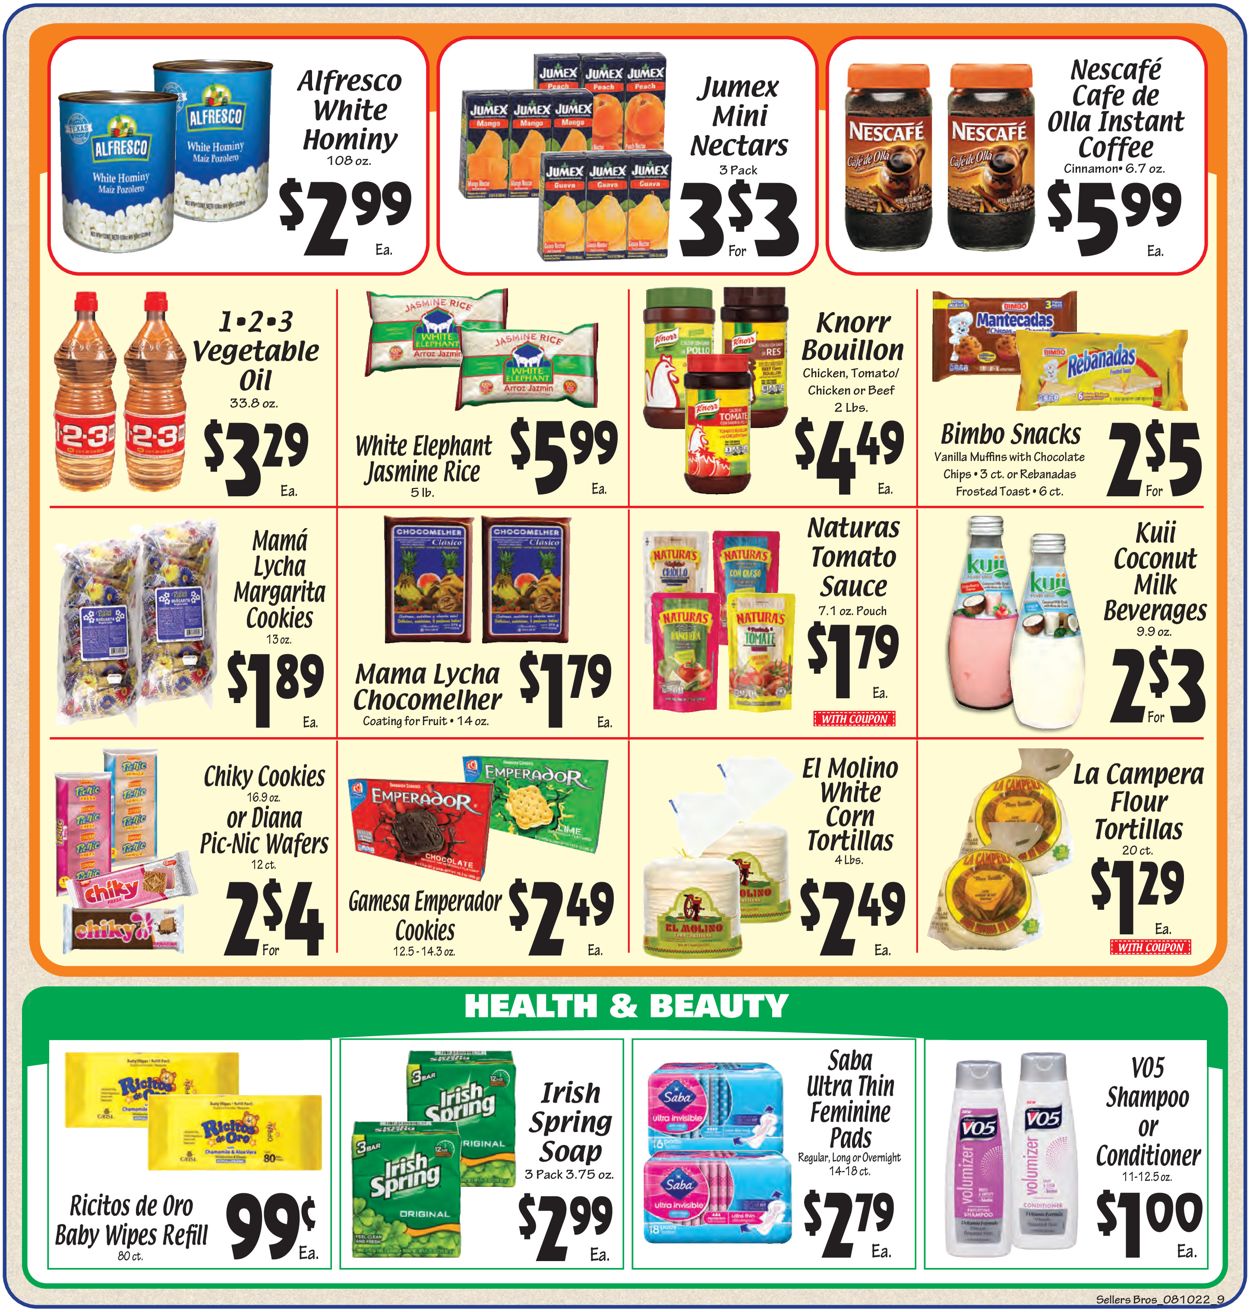 Sellers Bros. Ad from 08/10/2022